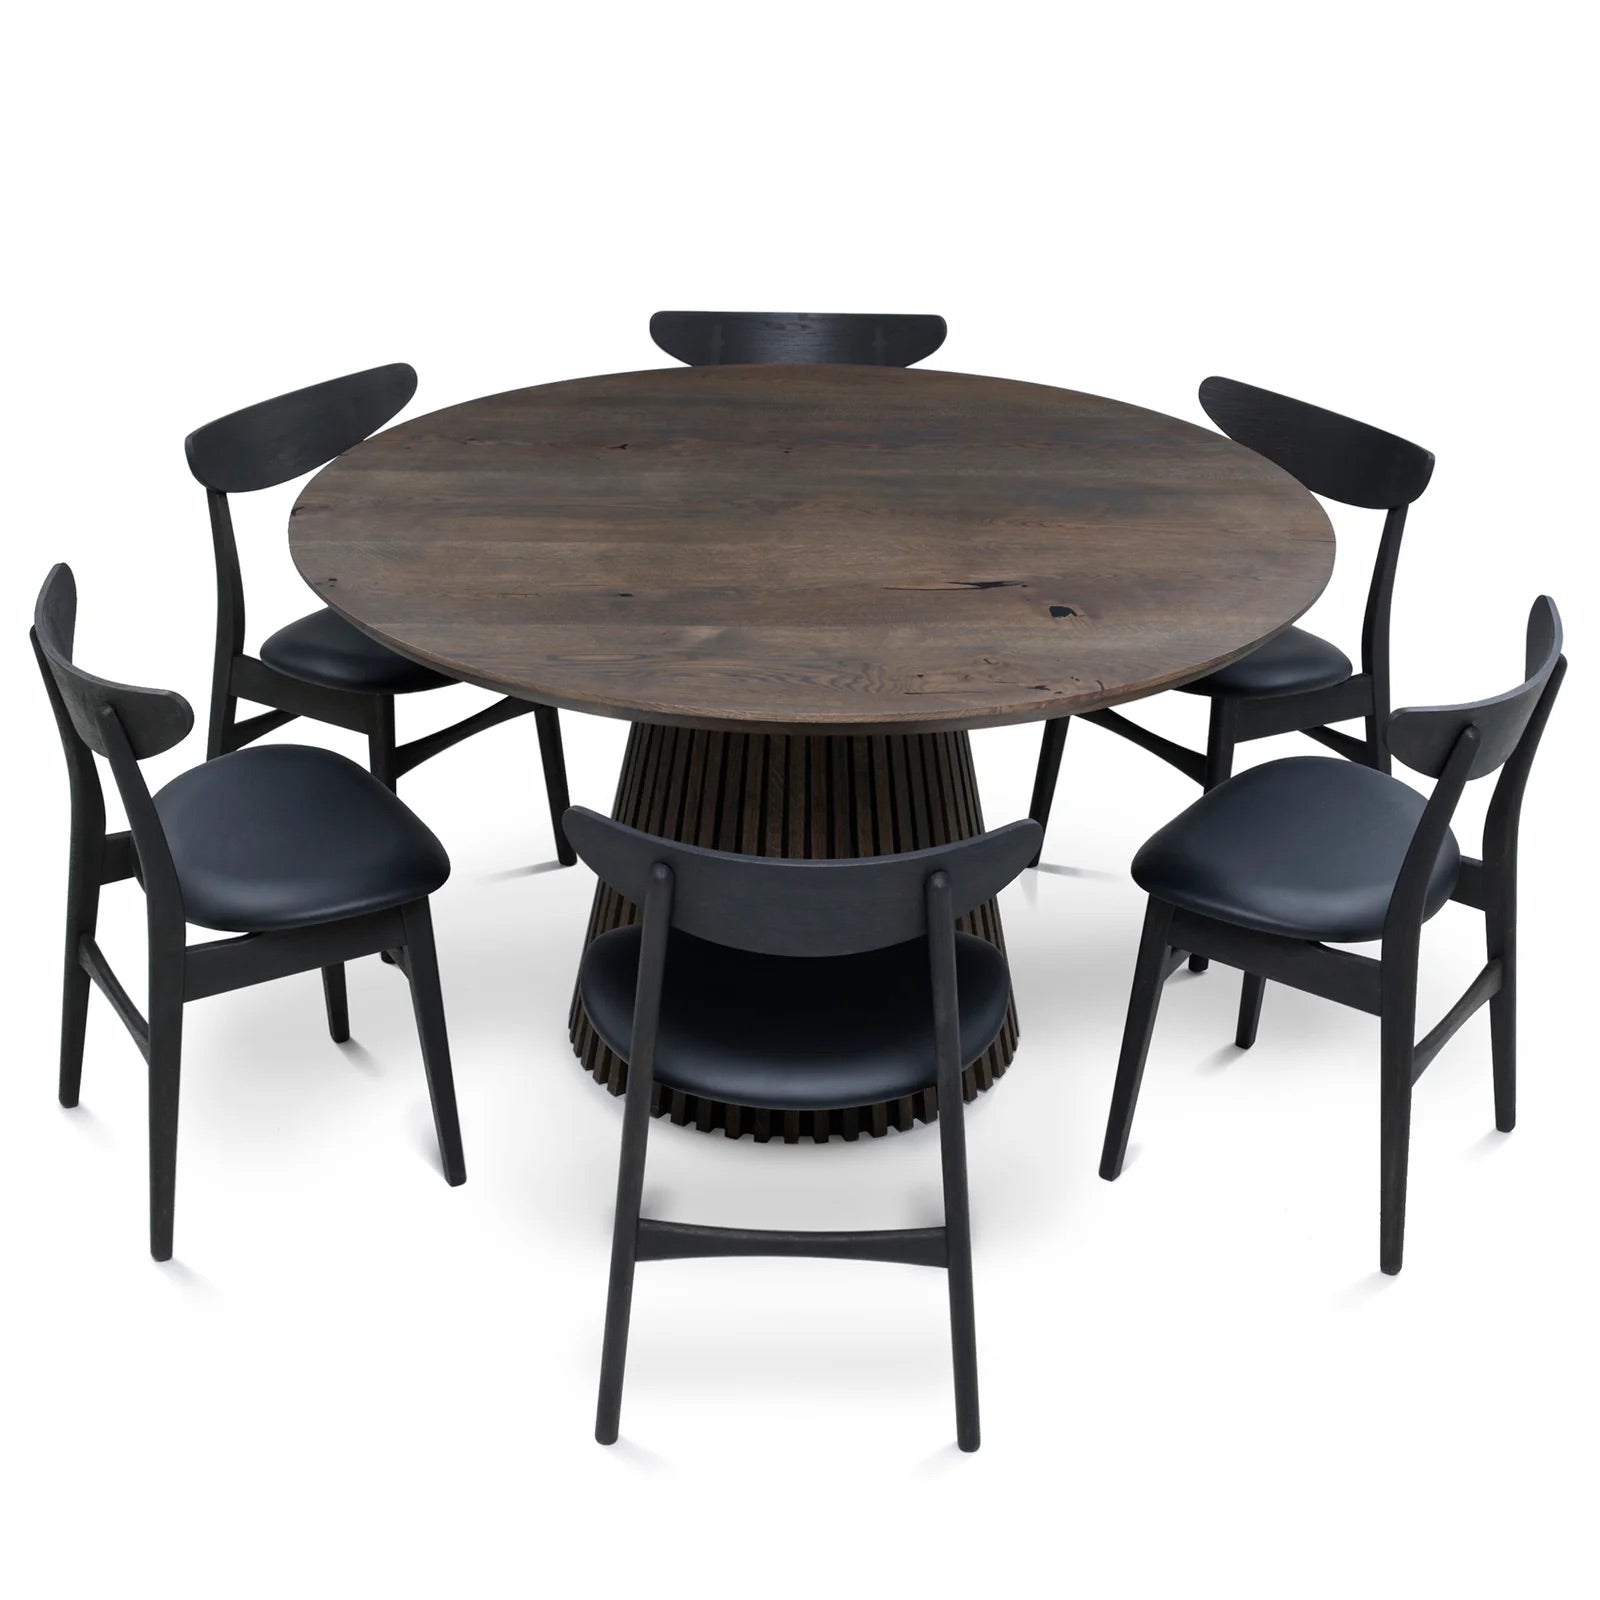 Handcrafted 4cm thick solid wood, oak round dining table extending from 100cm to 180cm for 4,6,8,10,12 seater. Available in black and white with chairs.